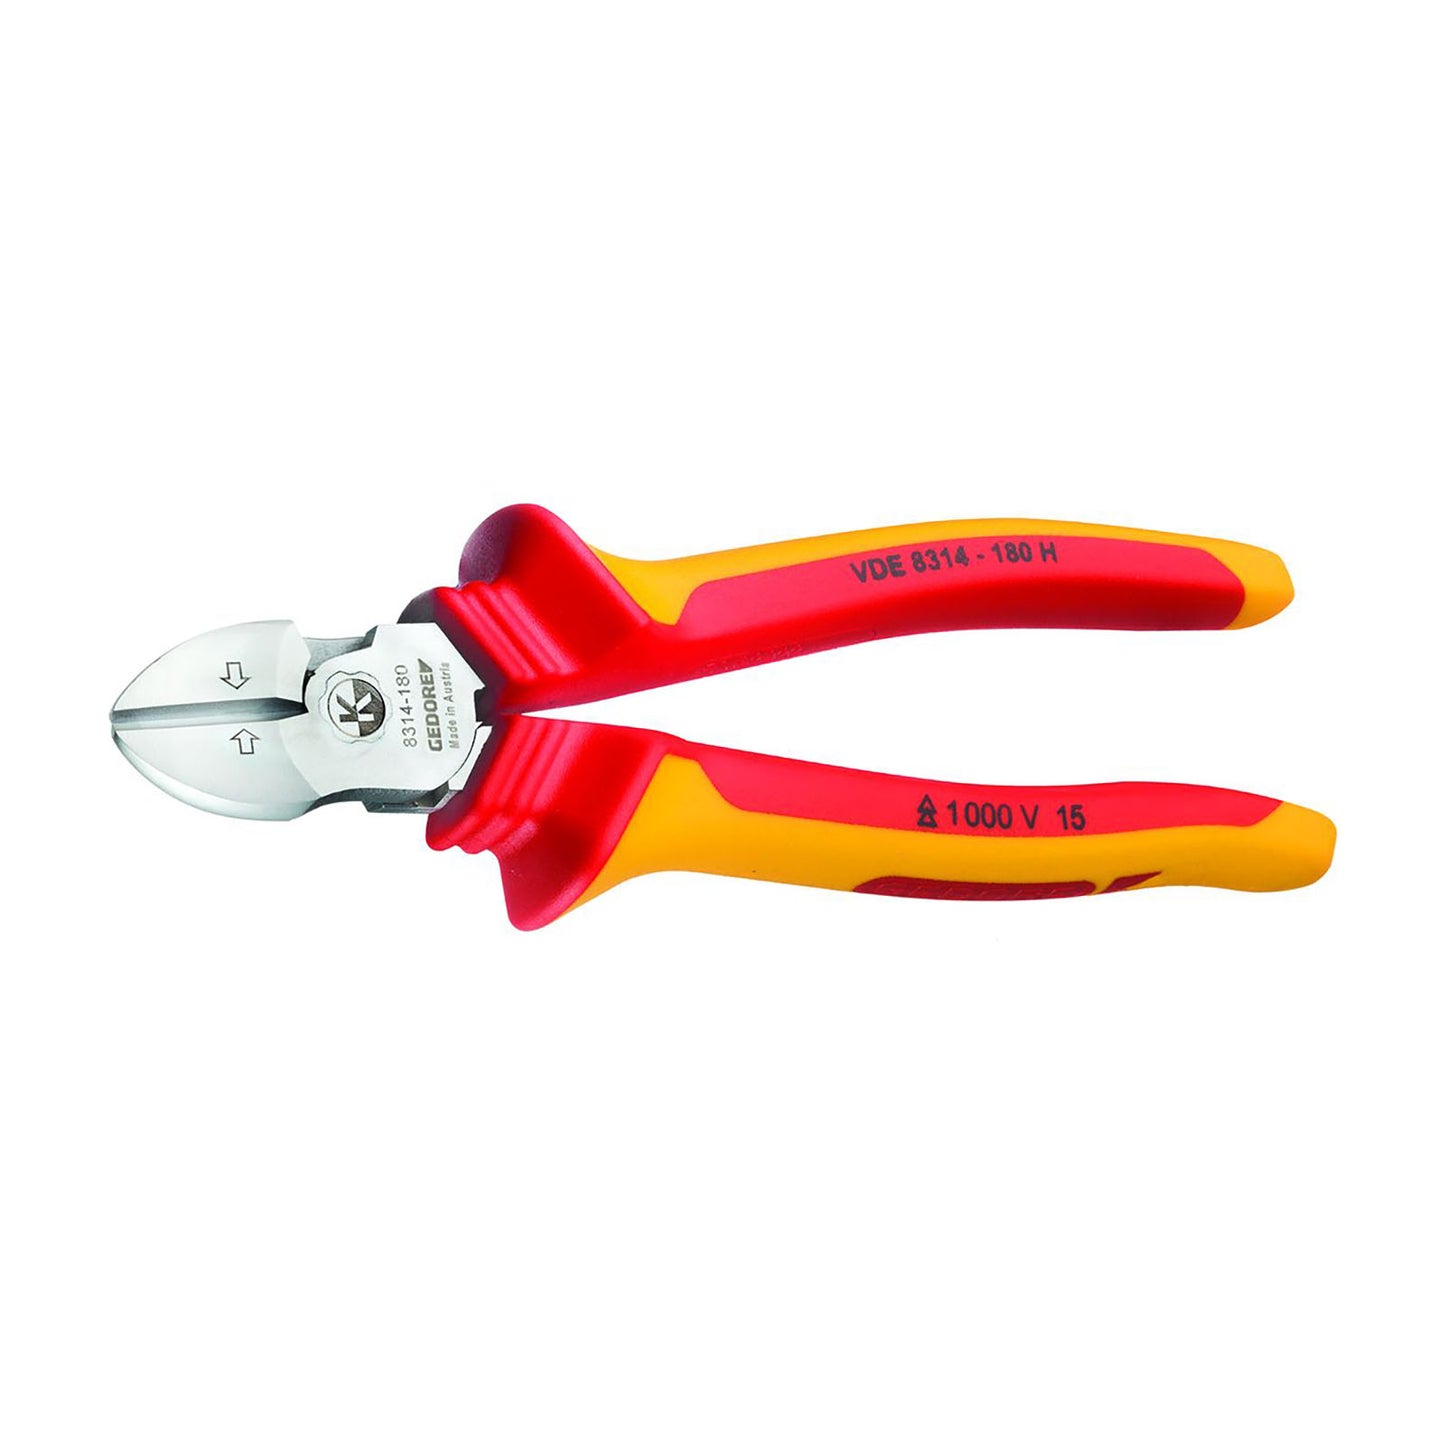 GEDORE SB VDE 8314-180 H - pliers vde8314-180h (3249050)